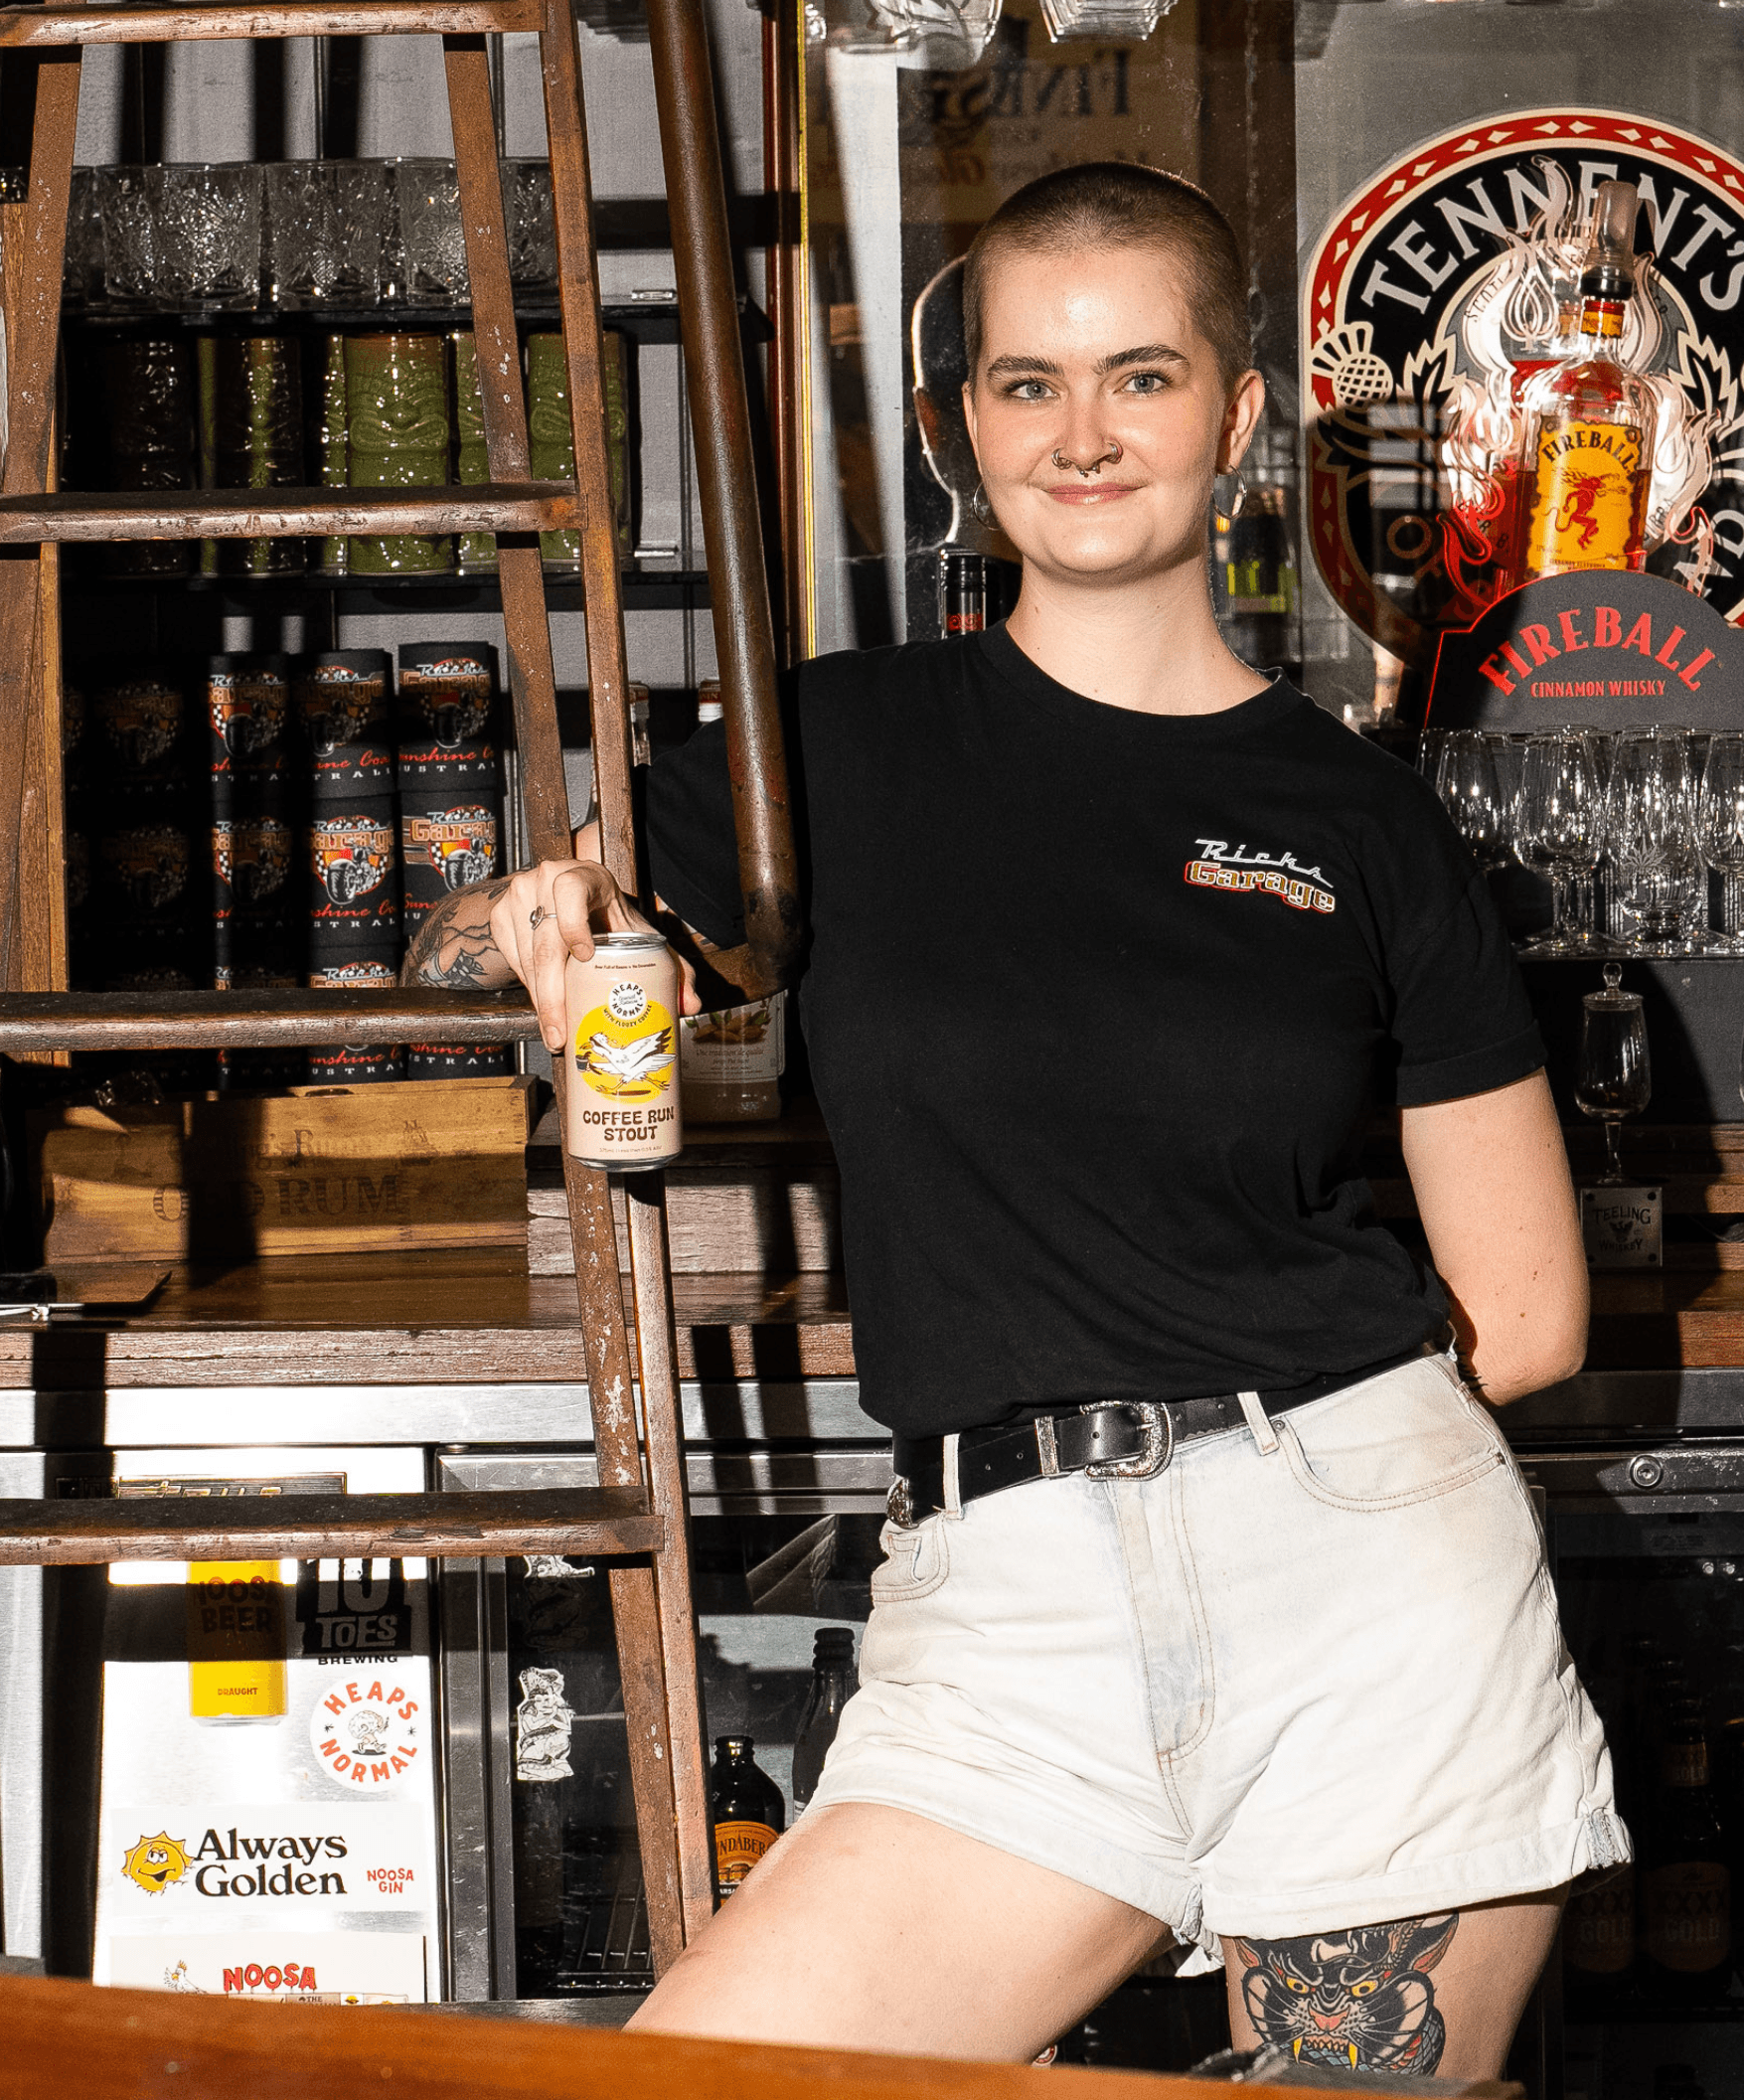 COFFEE RUN STOUT CHAMPIONS - KELSEY FROM RICK'S GARAGE - Heaps Normal